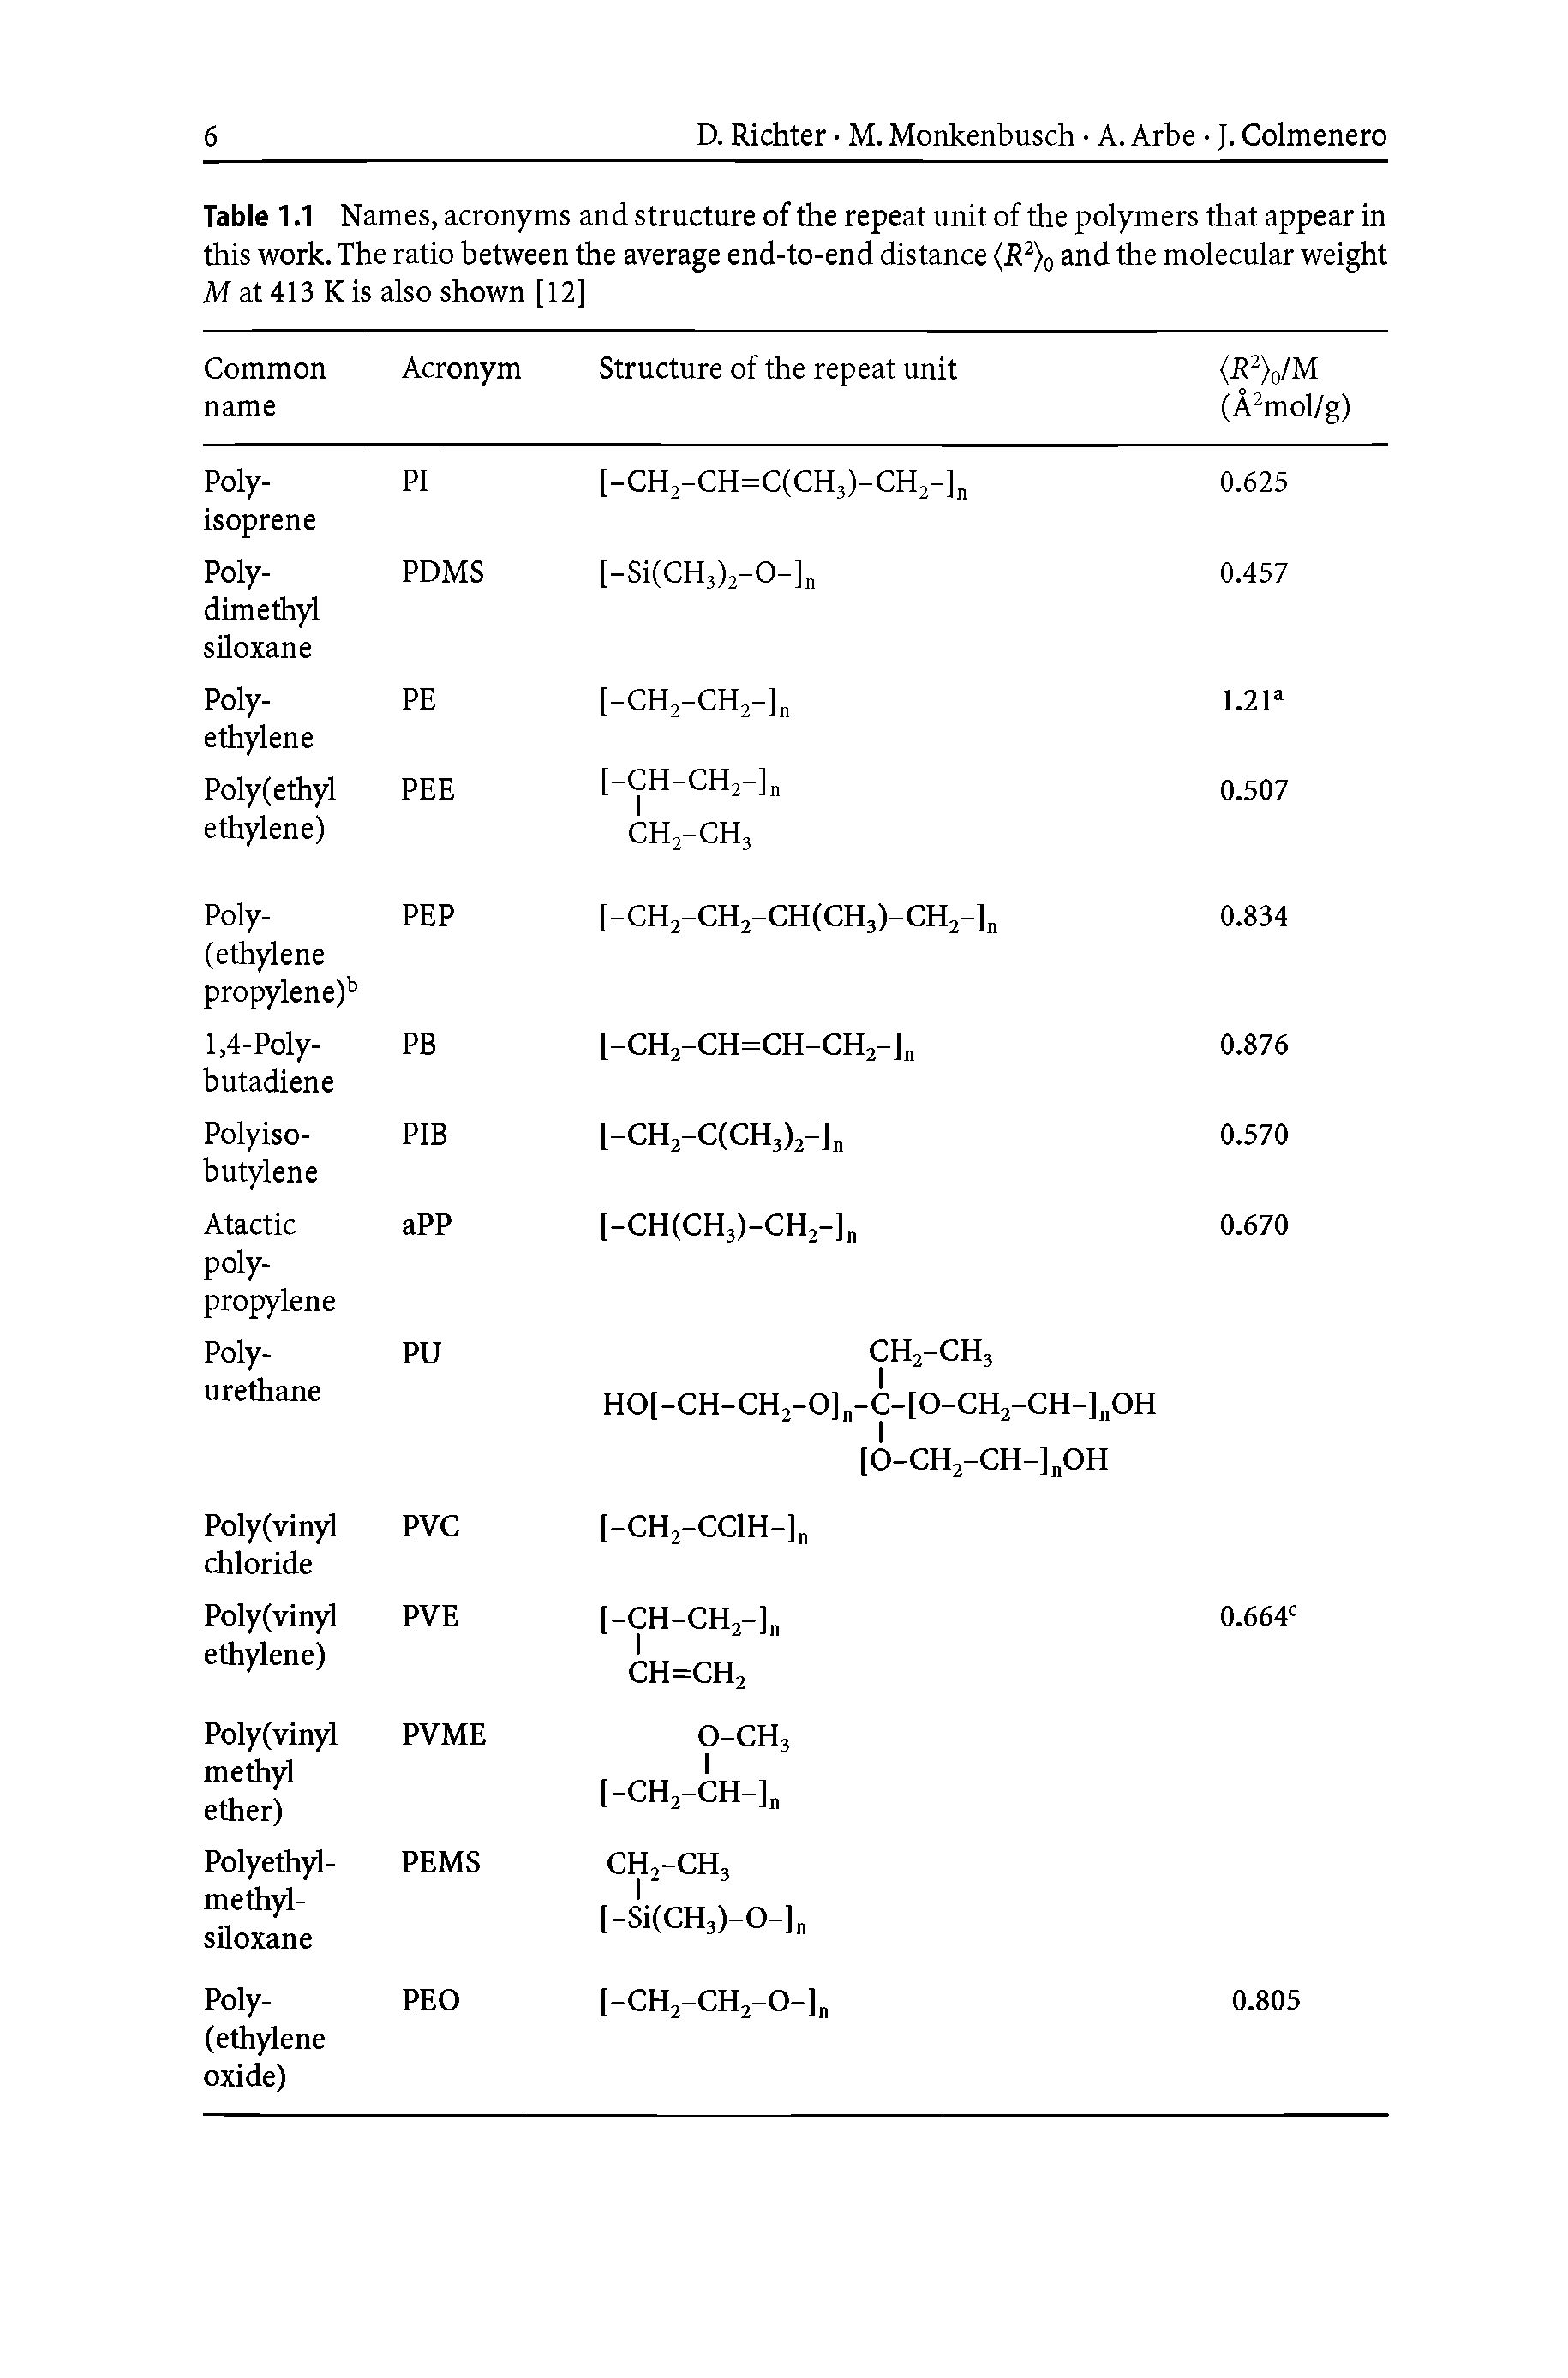 Table 1.1 Names, acronyms and structure of the repeat unit of the polymers that appear in this work. The ratio between the average end-to-end distance R and the molecular weight M at 413 K is also shown [12] ...